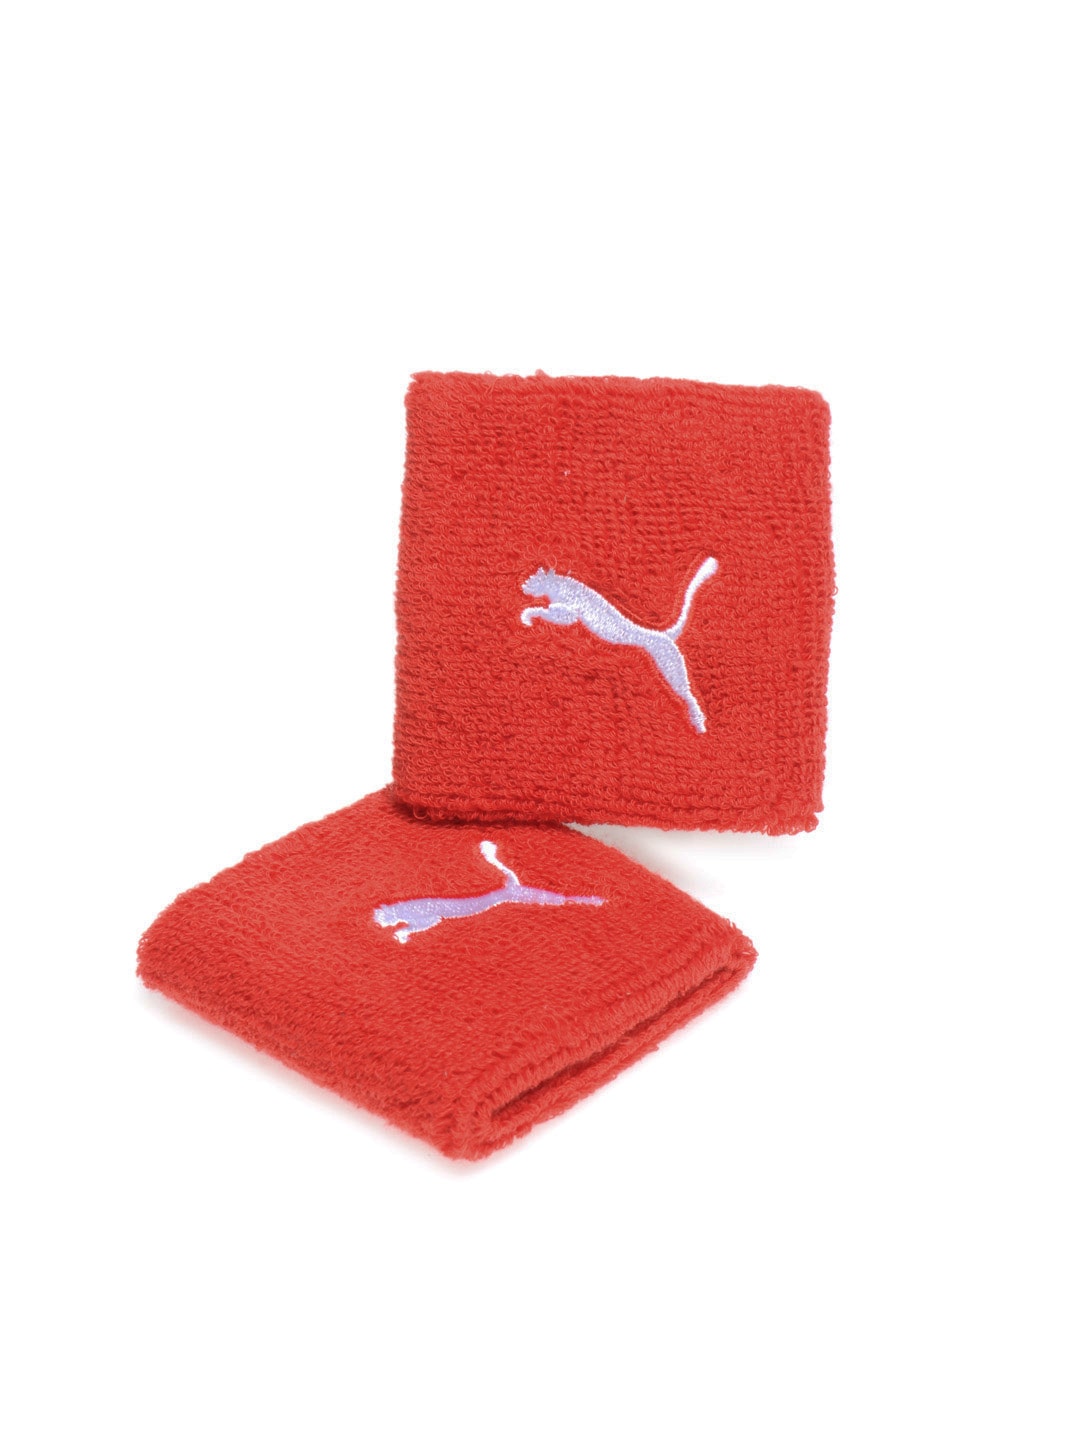 Puma Unisex Pack of 2 Red Wristband